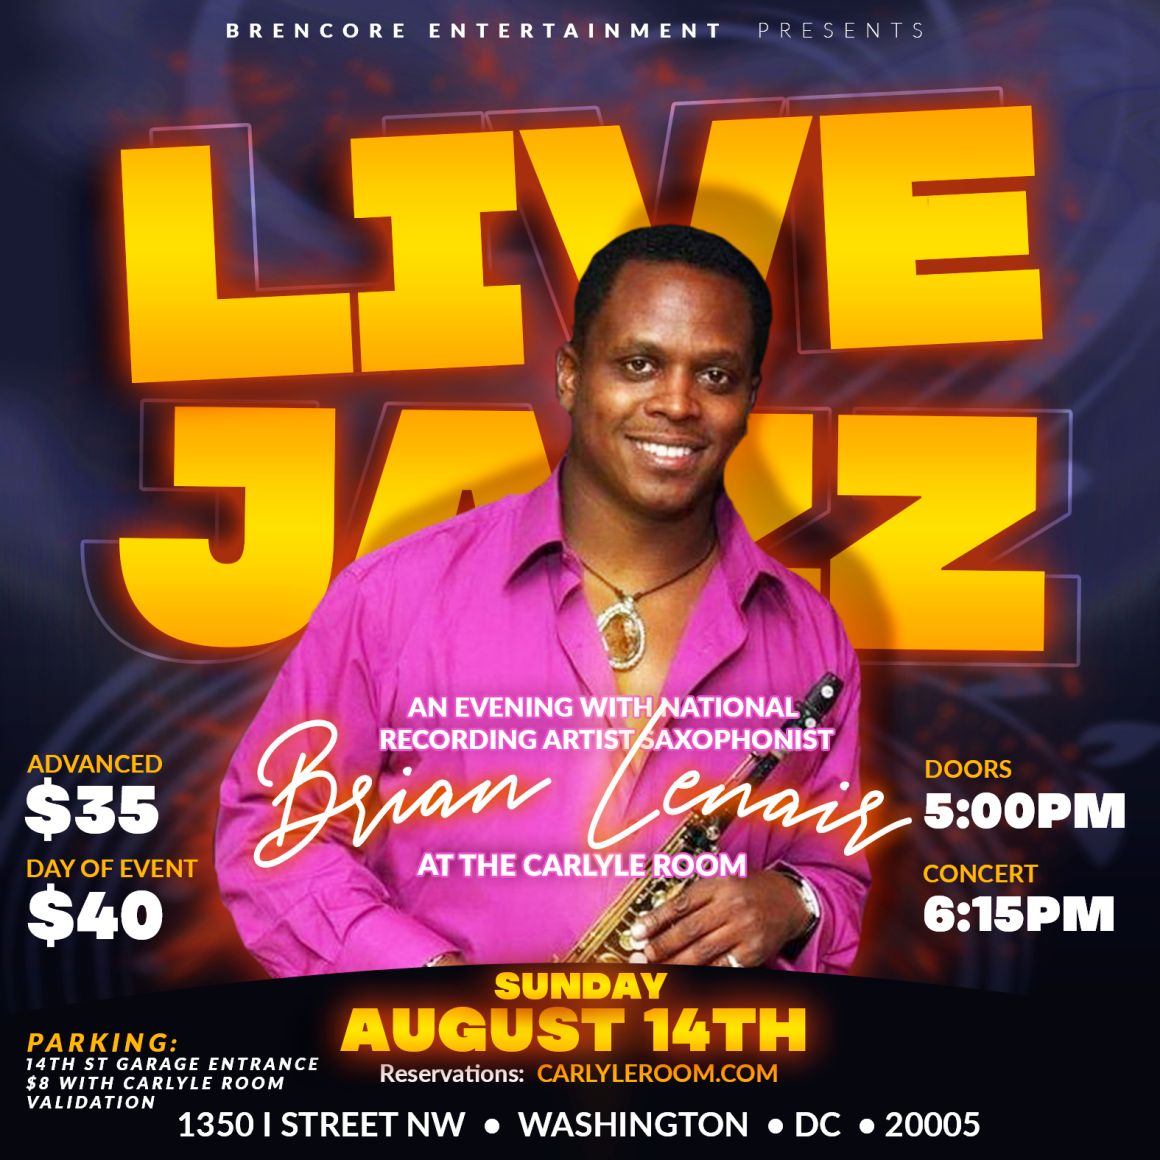 An Evening with National Recording Artist Saxophonist Brian Lenair